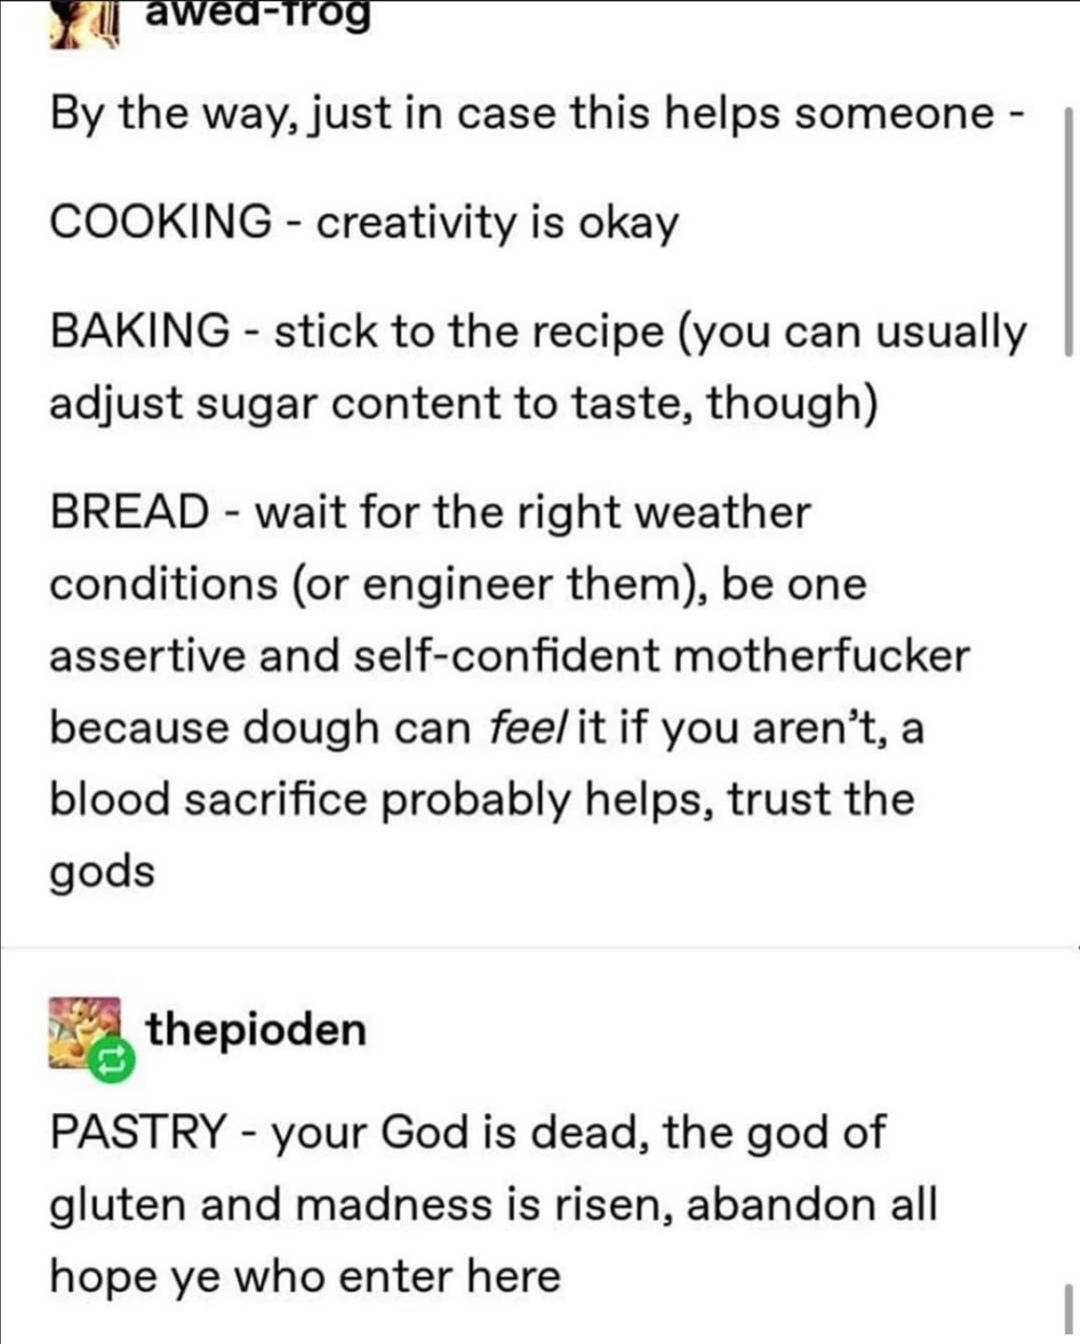 Pastry is Hell